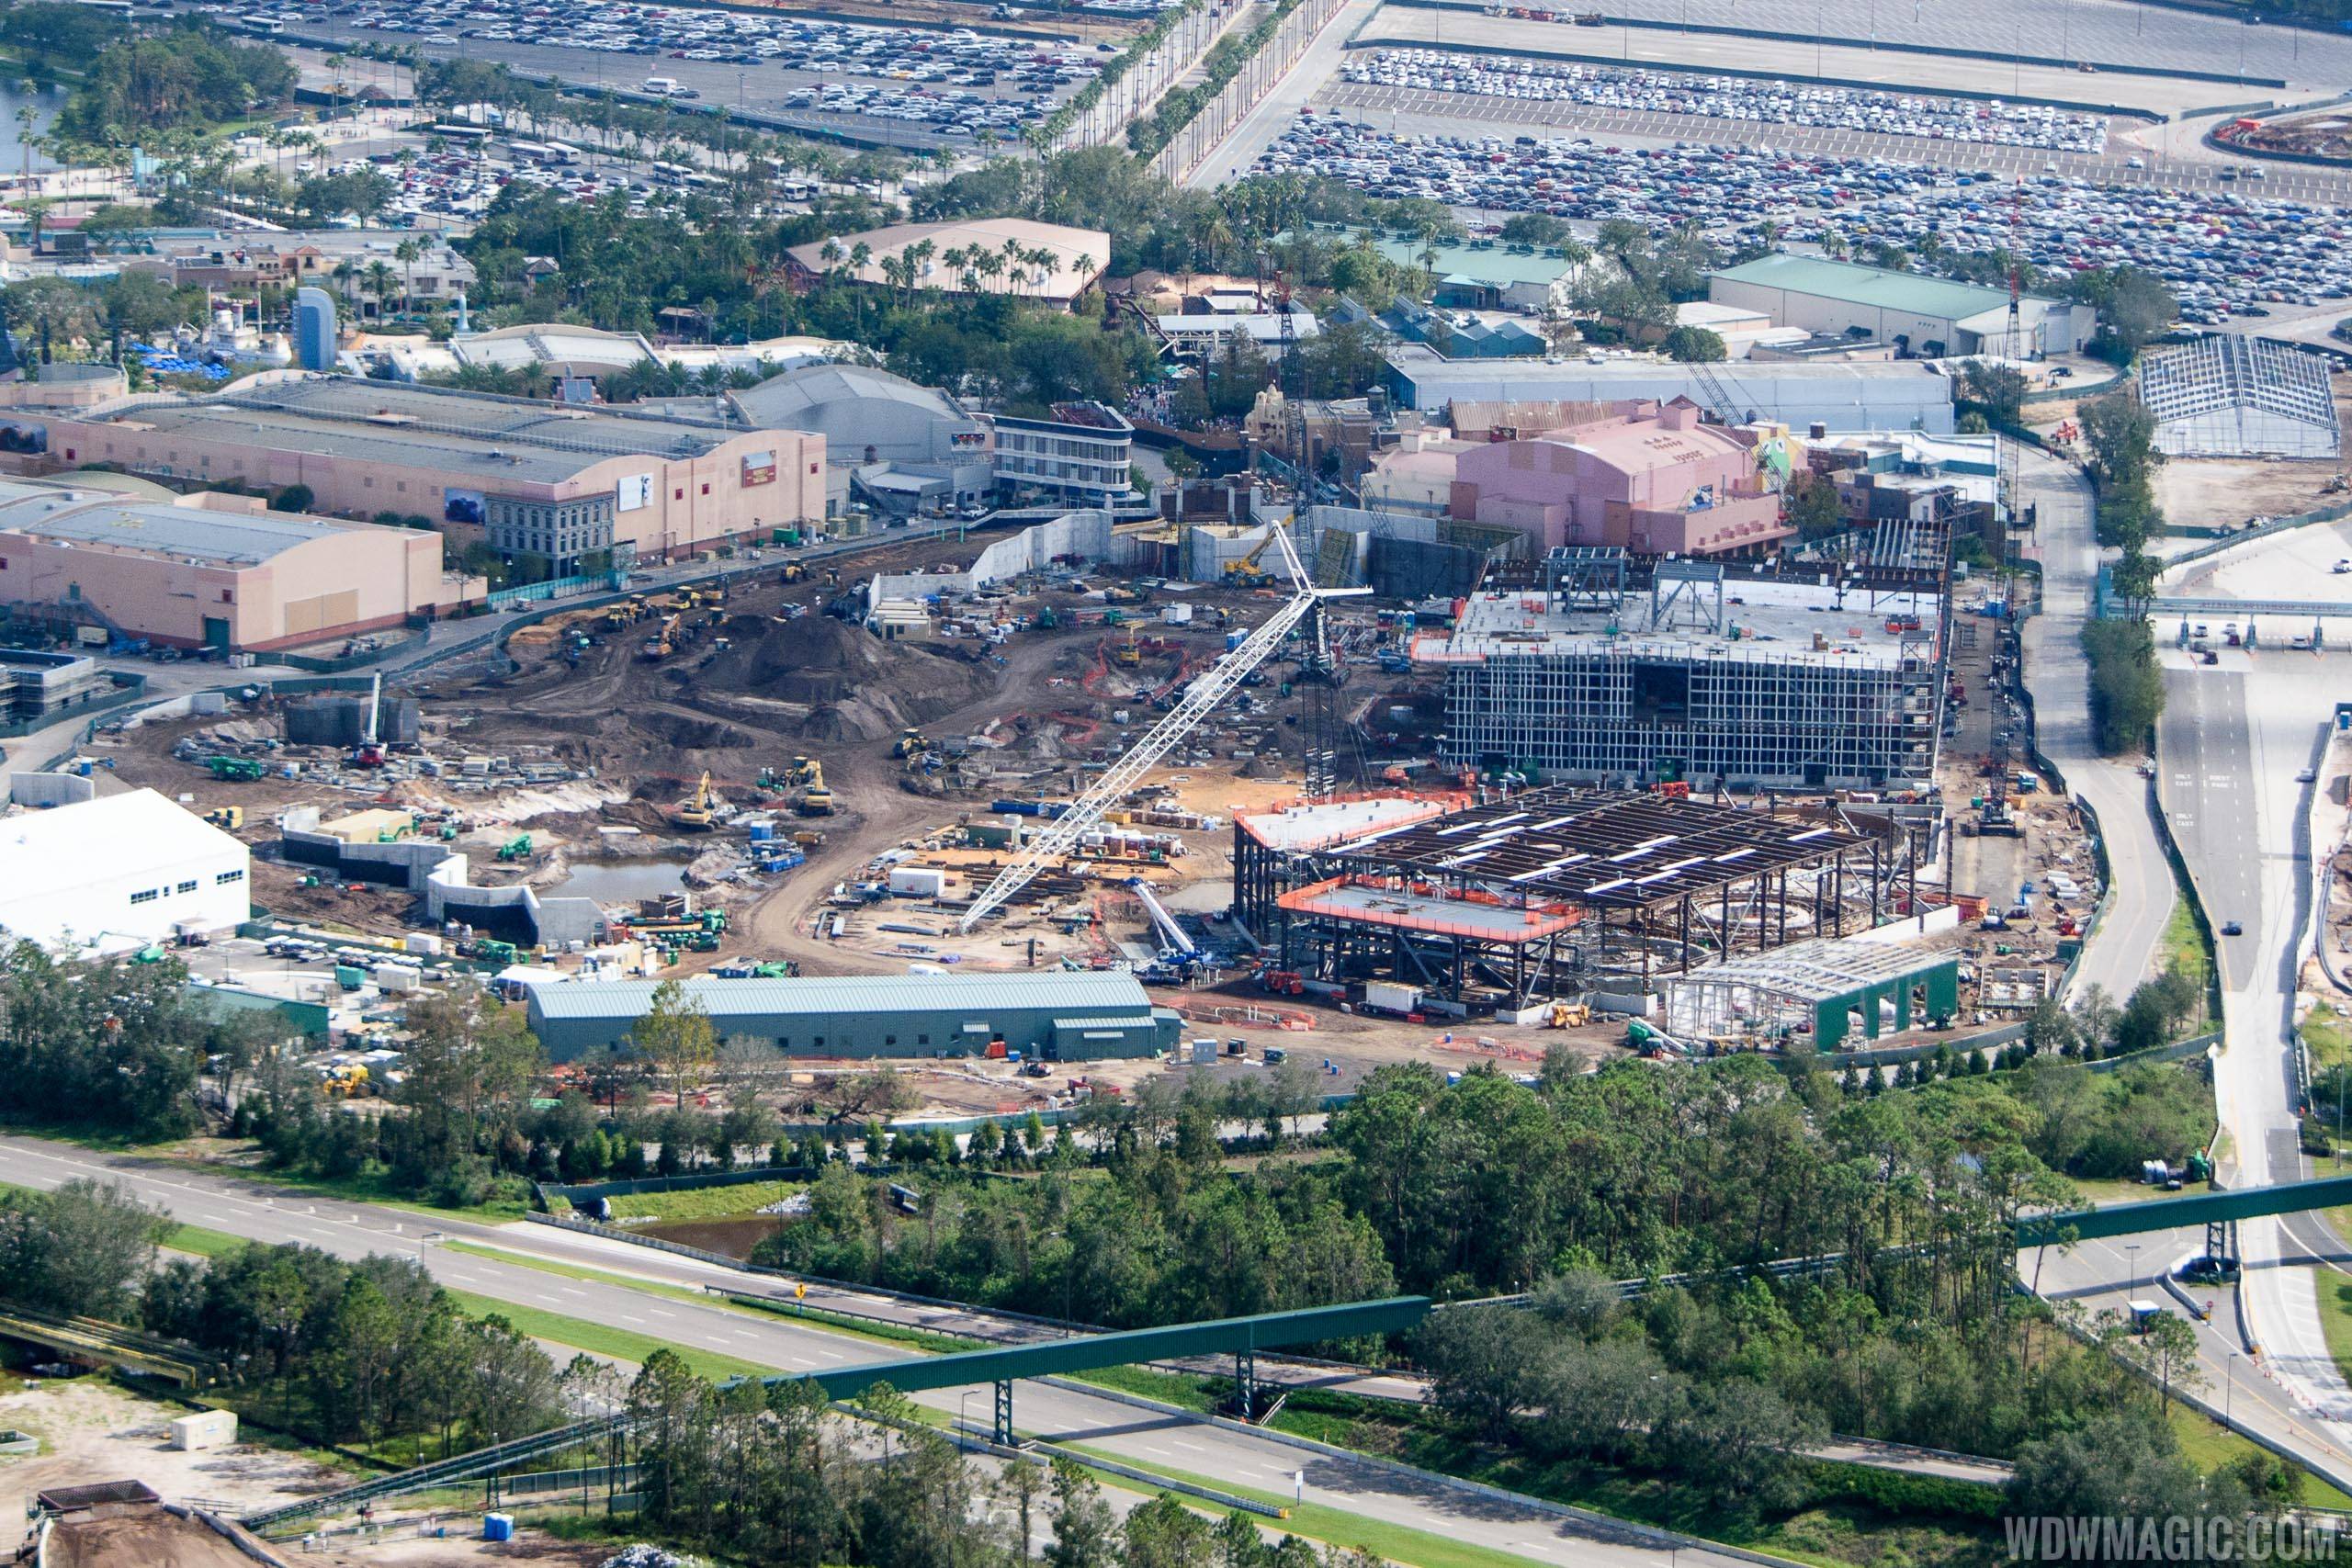 Star Wars Galaxy's Edge construction from the air